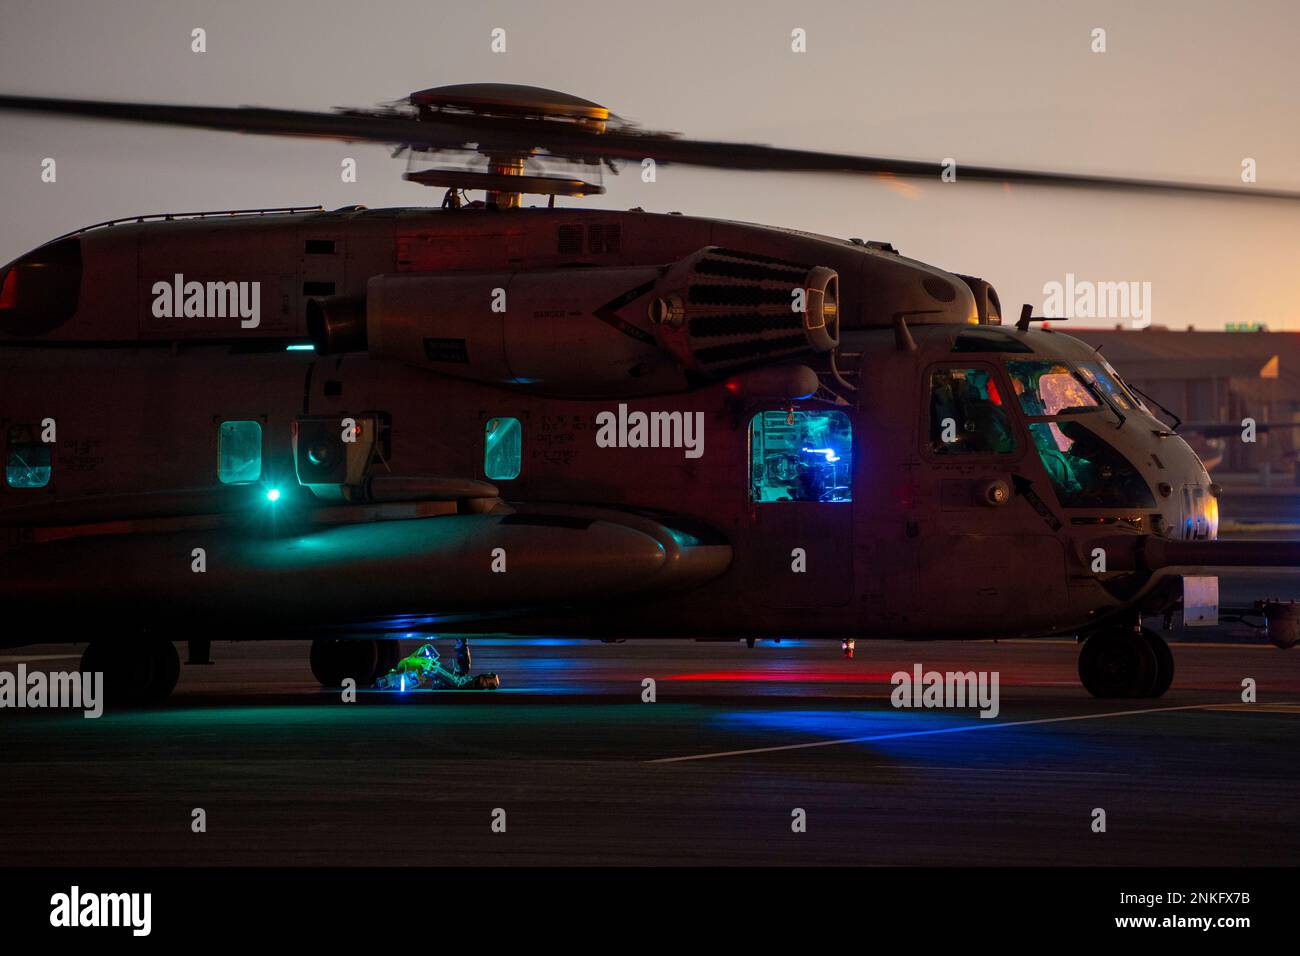 A U.S. Marine Corps CH-53E Super Stallion helicopter with Marine Medium Tiltrotor Squadron 262 (Reinforced), 31st Marine Expeditionary Unit (MEU), sits on the flight line prior to nighttime external lift training at Marine Corps Air Station Iwakuni, Japan, Feb. 19, 2023. This helicopter support team exercise was conducted to certify pilots in sling load operations and improve tactical proficiency. The 31st MEU, the Marine Corps’ only continuously forward-deployed MEU, provides a flexible and lethal force ready to perform a wide range of military operations as the premiere crisis response force Stock Photo